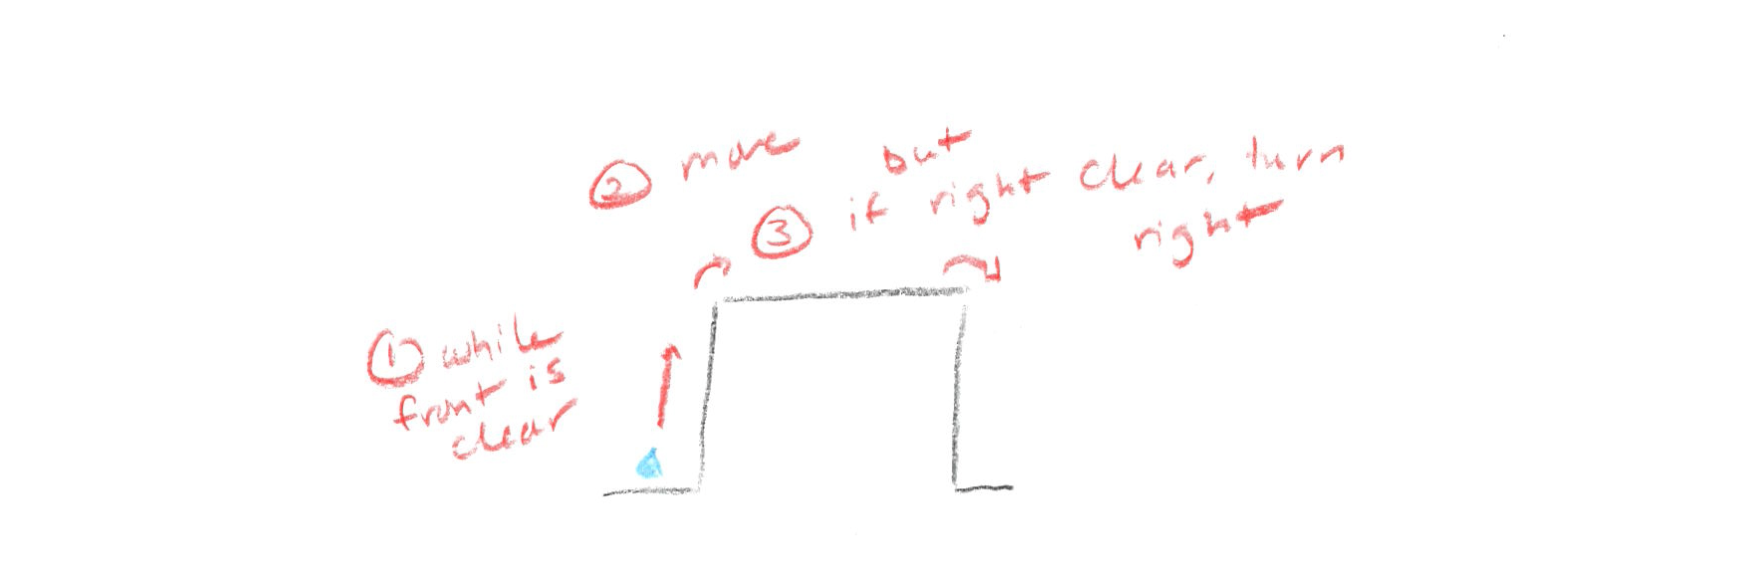 a sketch of Bit going over one hurdle